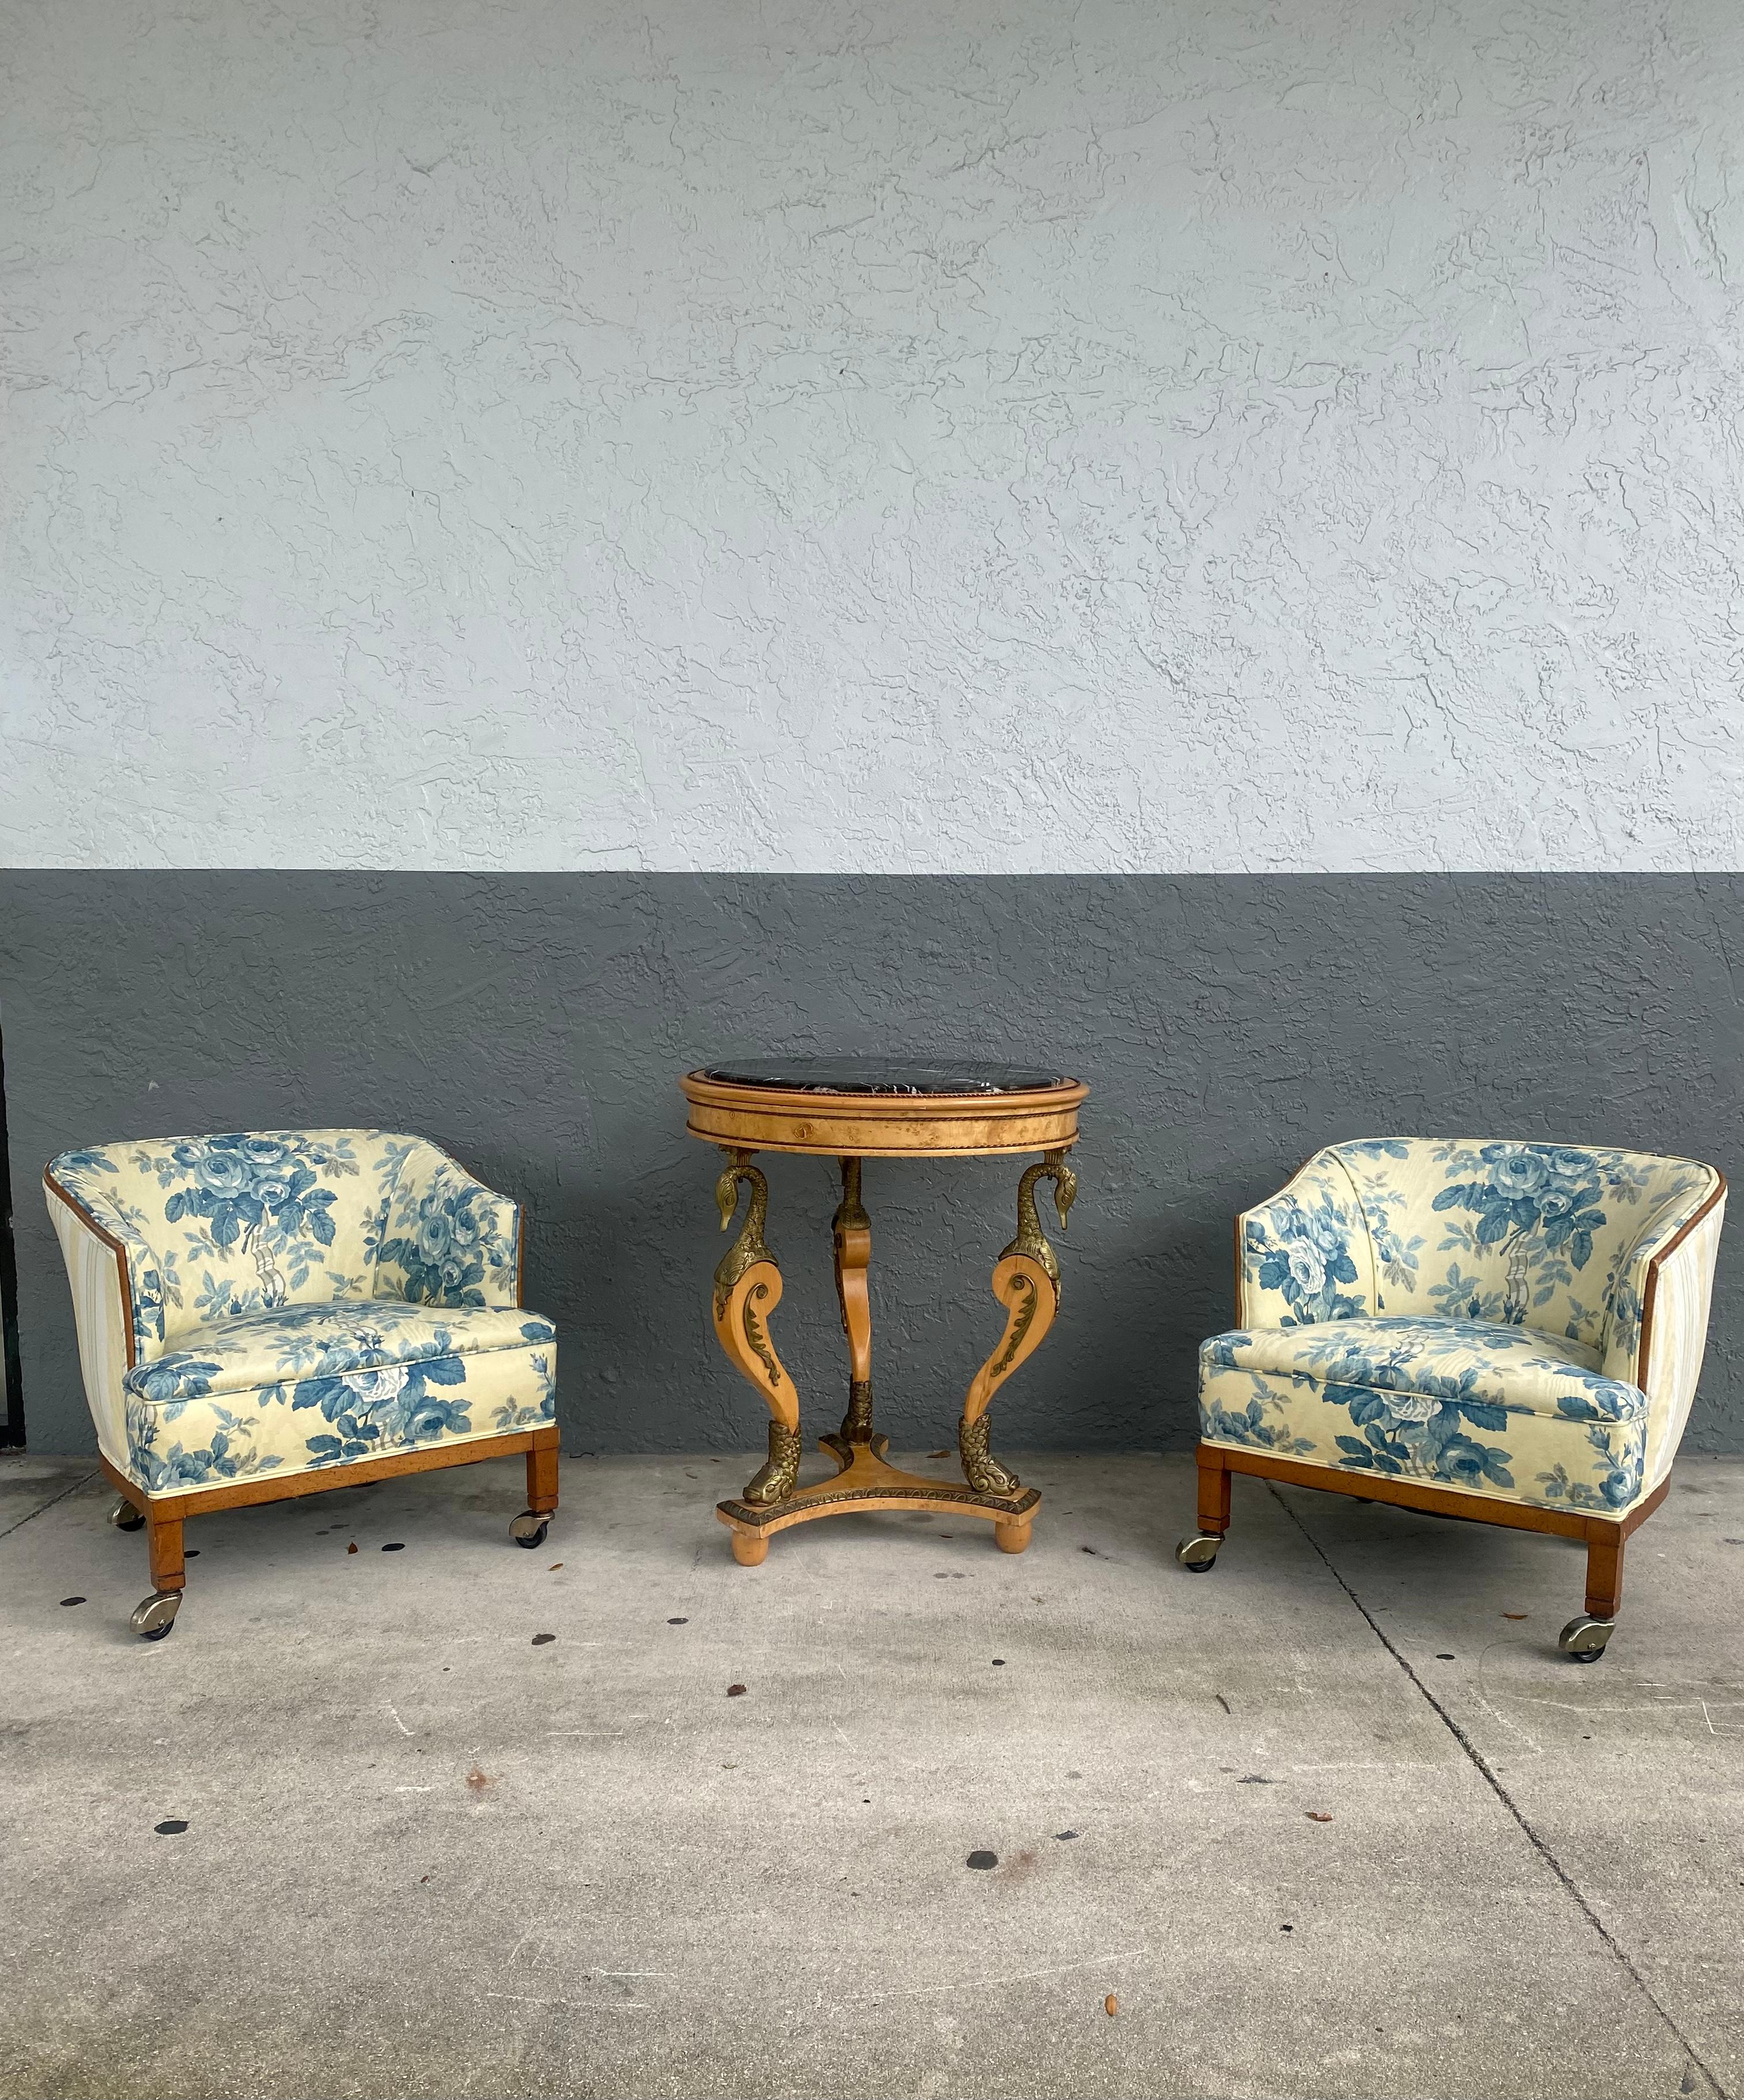 1960s French Toile Barrel Back Wood Castors Chairs, Set of 2 For Sale 4